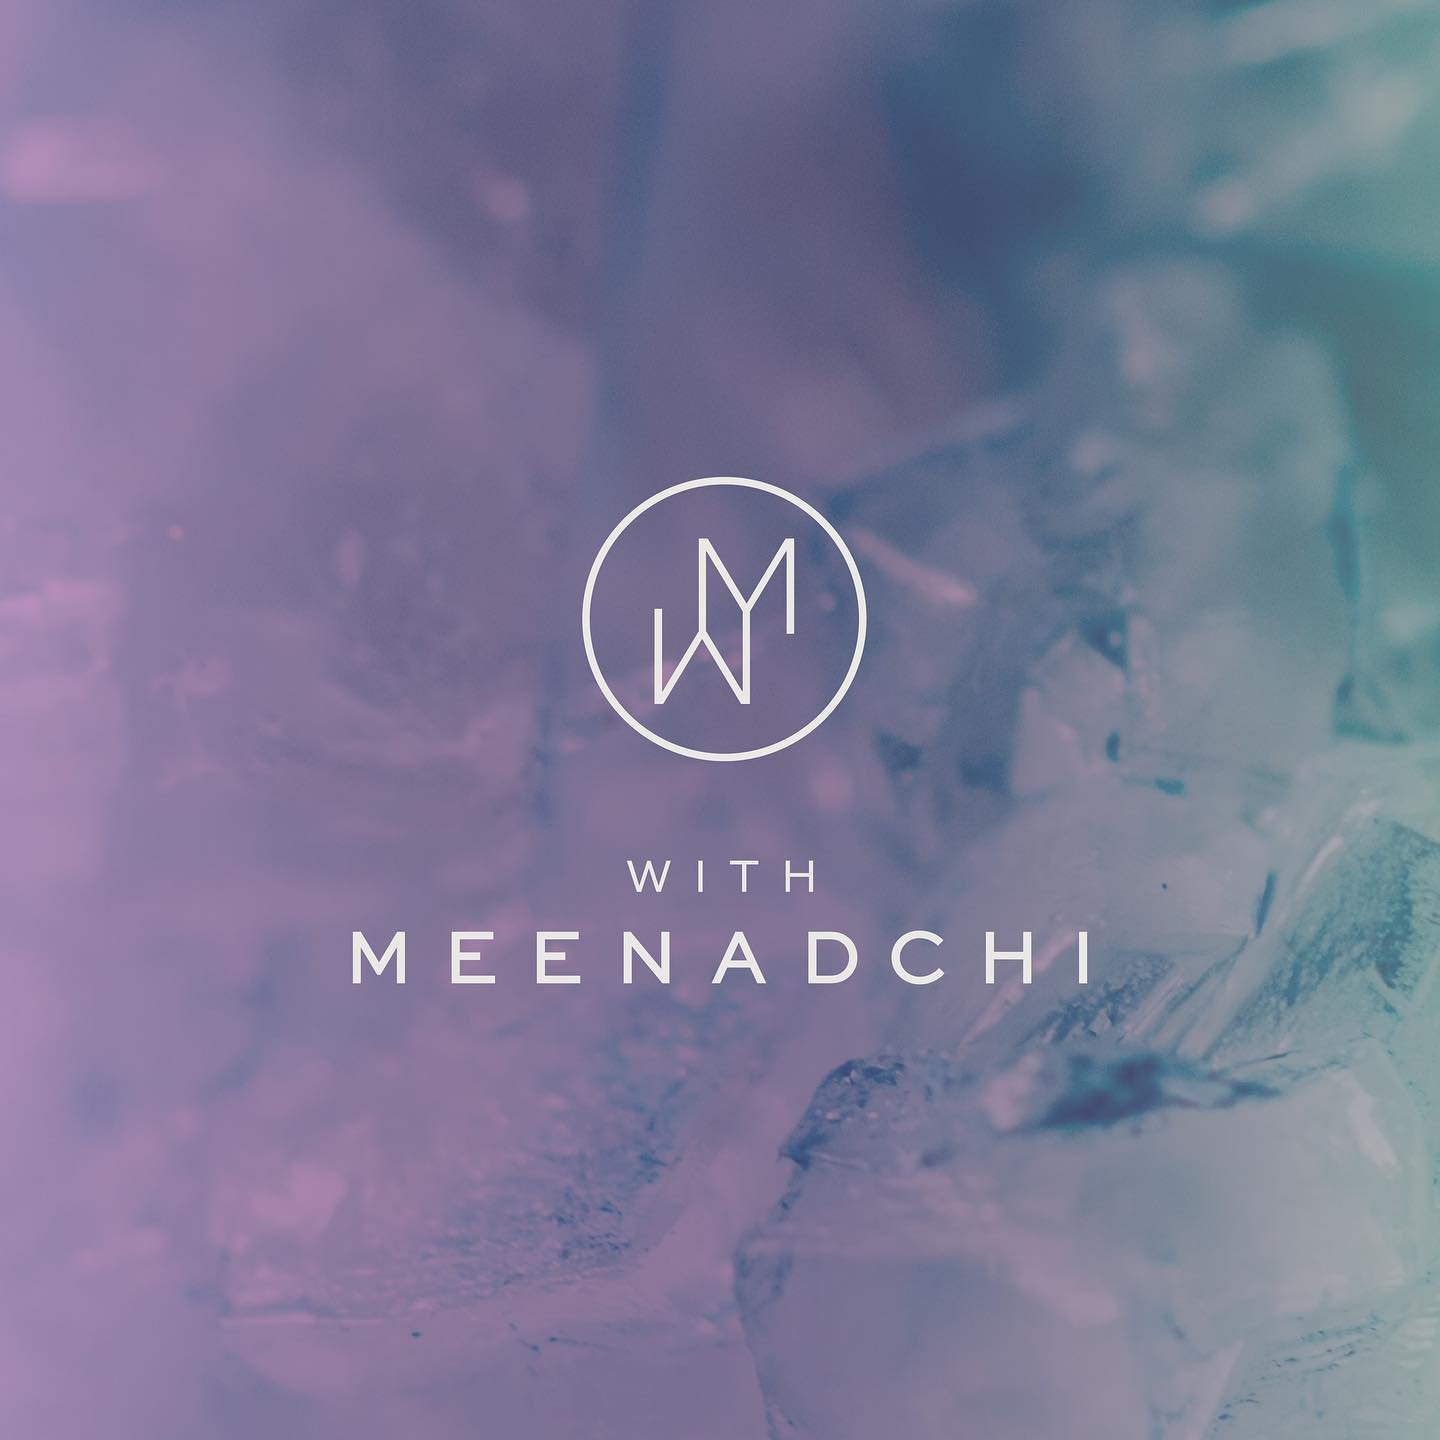 I had the pleasure of collaborating with @with.meenadchi this summer on her rebrand. I&rsquo;m thrilled to feature it today! Scroll through to see this beauty 💫

Meenadchi is a Somatic Healing Practitioner, helping her clients reconnect with the int